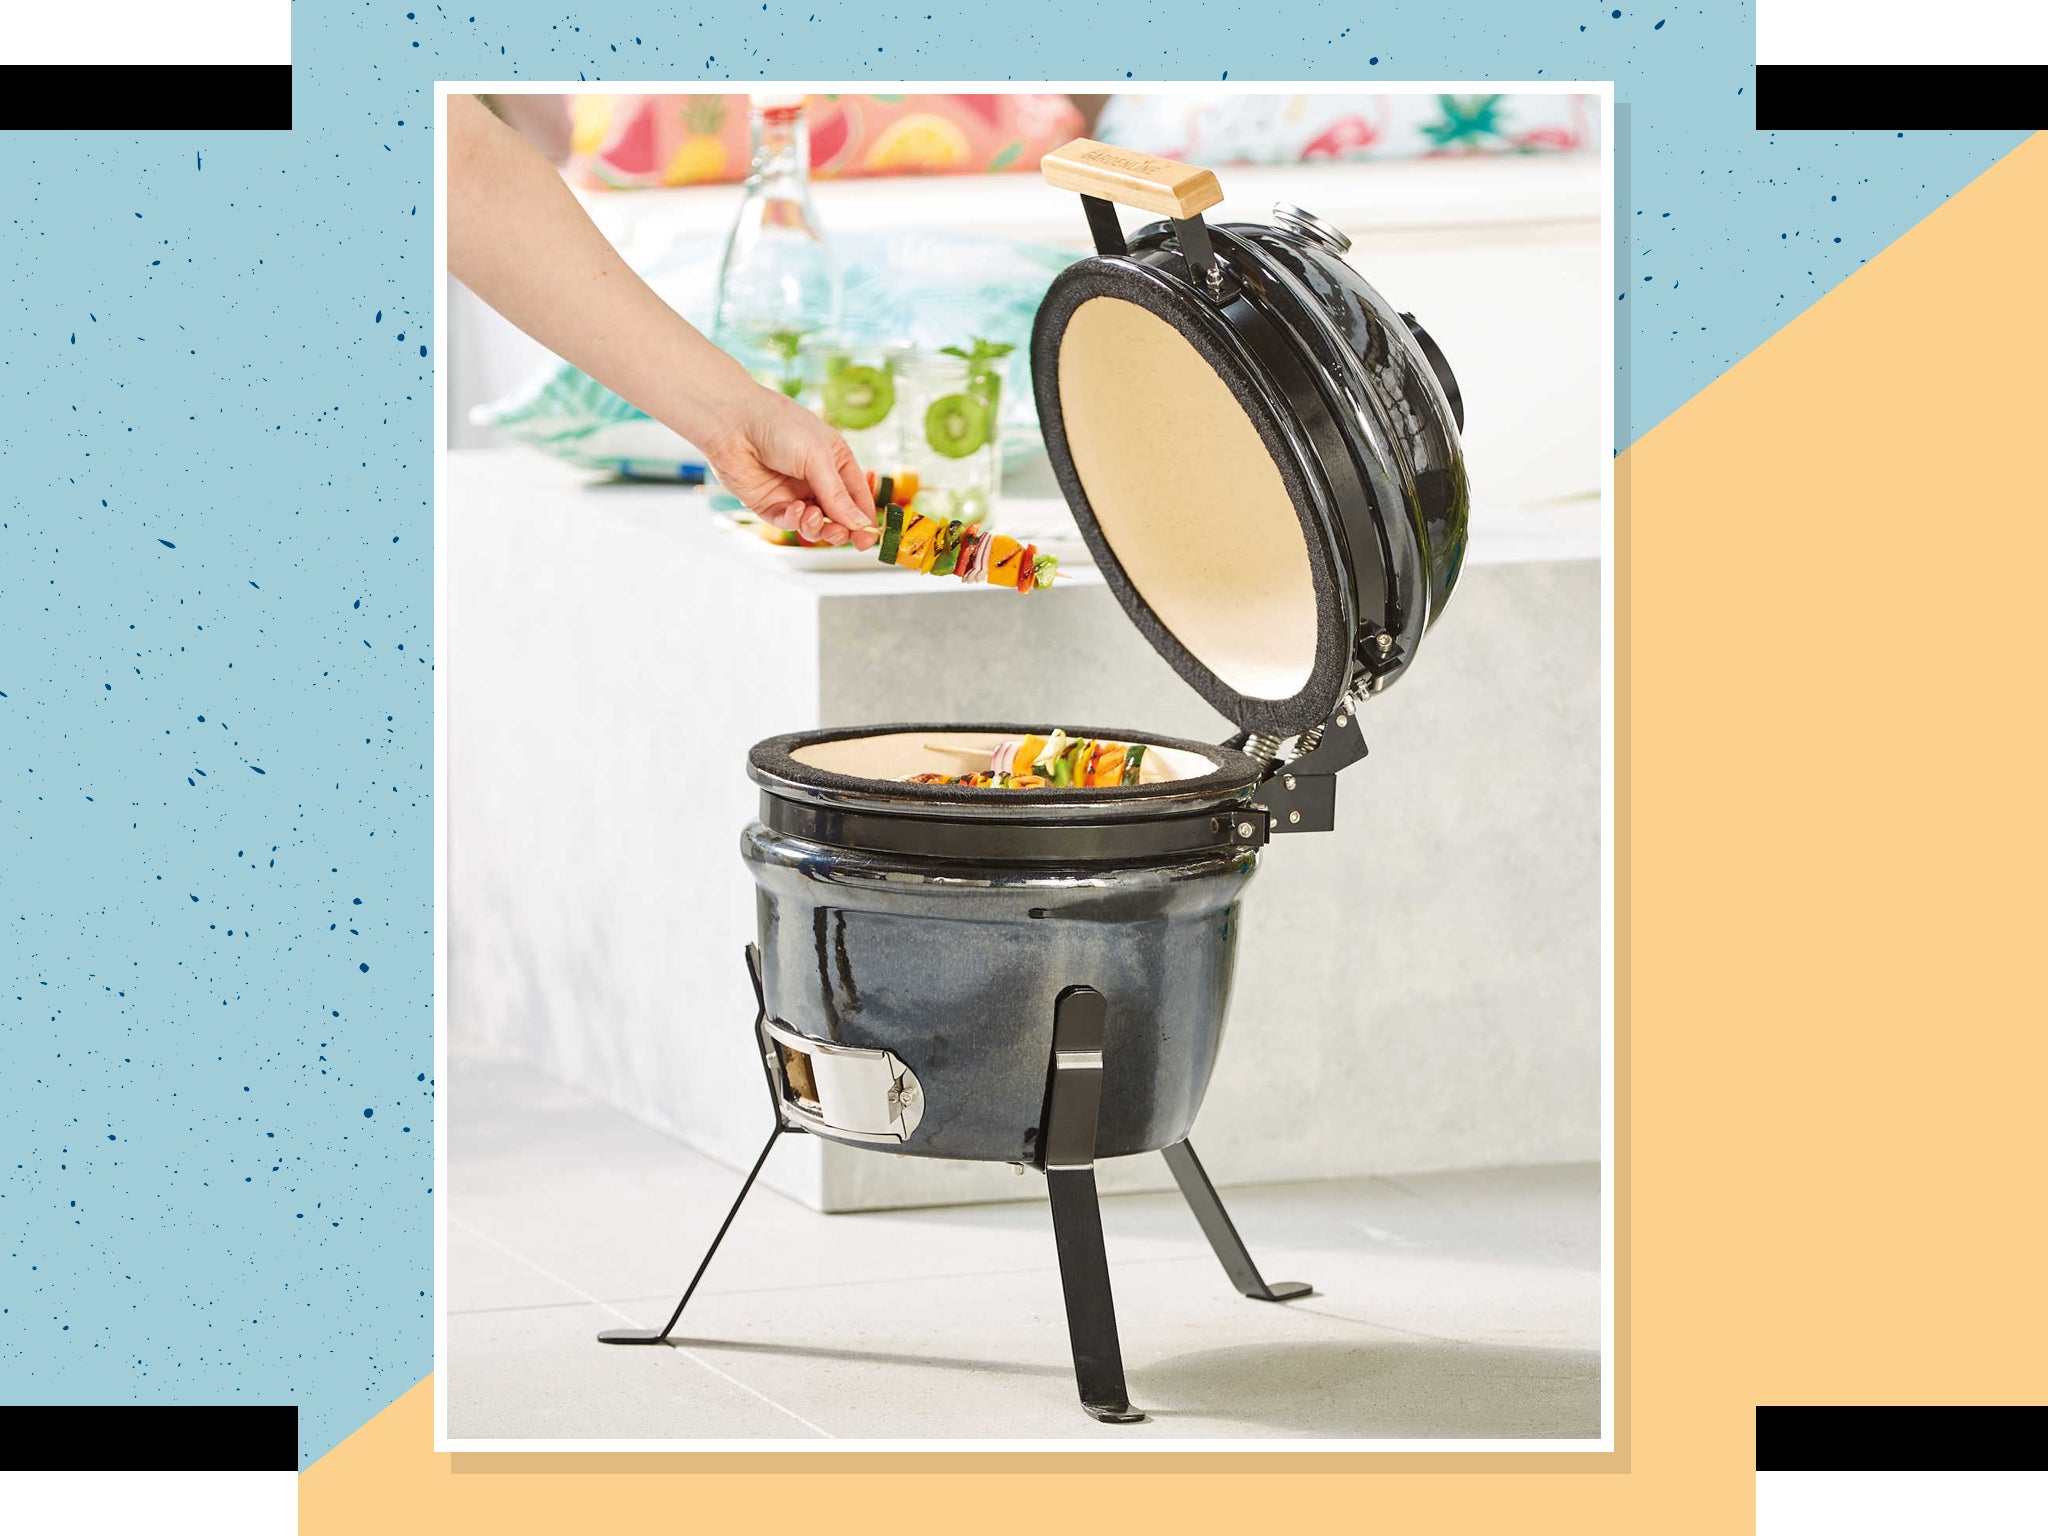 Find your affordable BBQ essentials at Aldi 